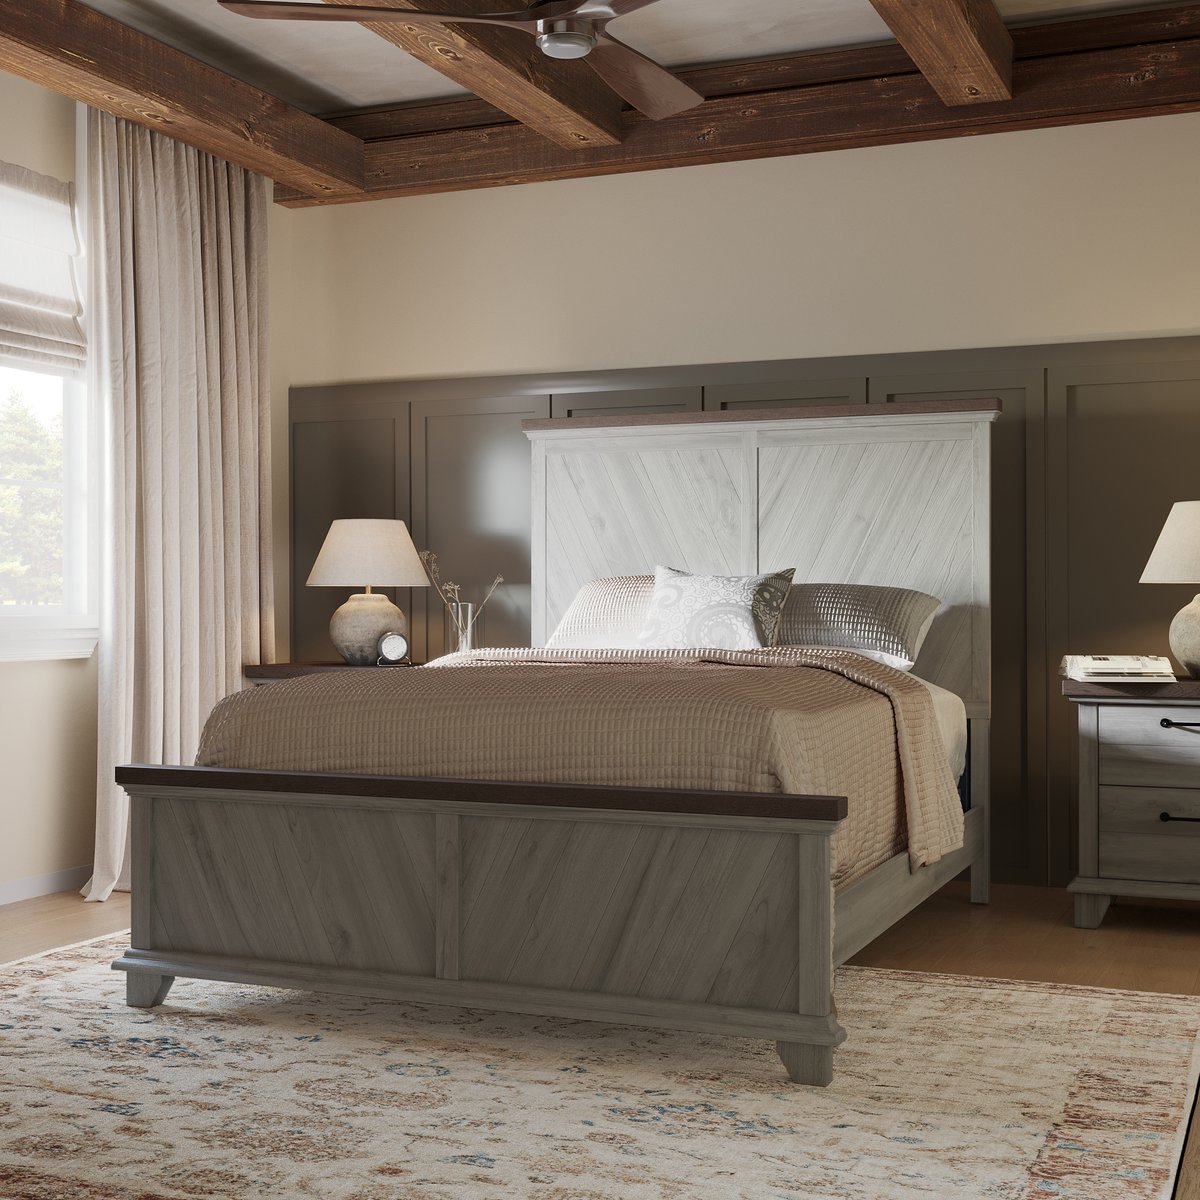 Want to level up your bedroom aesthetic? Whether your style is rustic chic or modern minimalism, the Bear Creek Farmhouse Queen Bed fits right in. Snatch up this beauty at galleryfurniture.biz/4acSjxC and infuse your home with the irresistible allure of rustic charm!